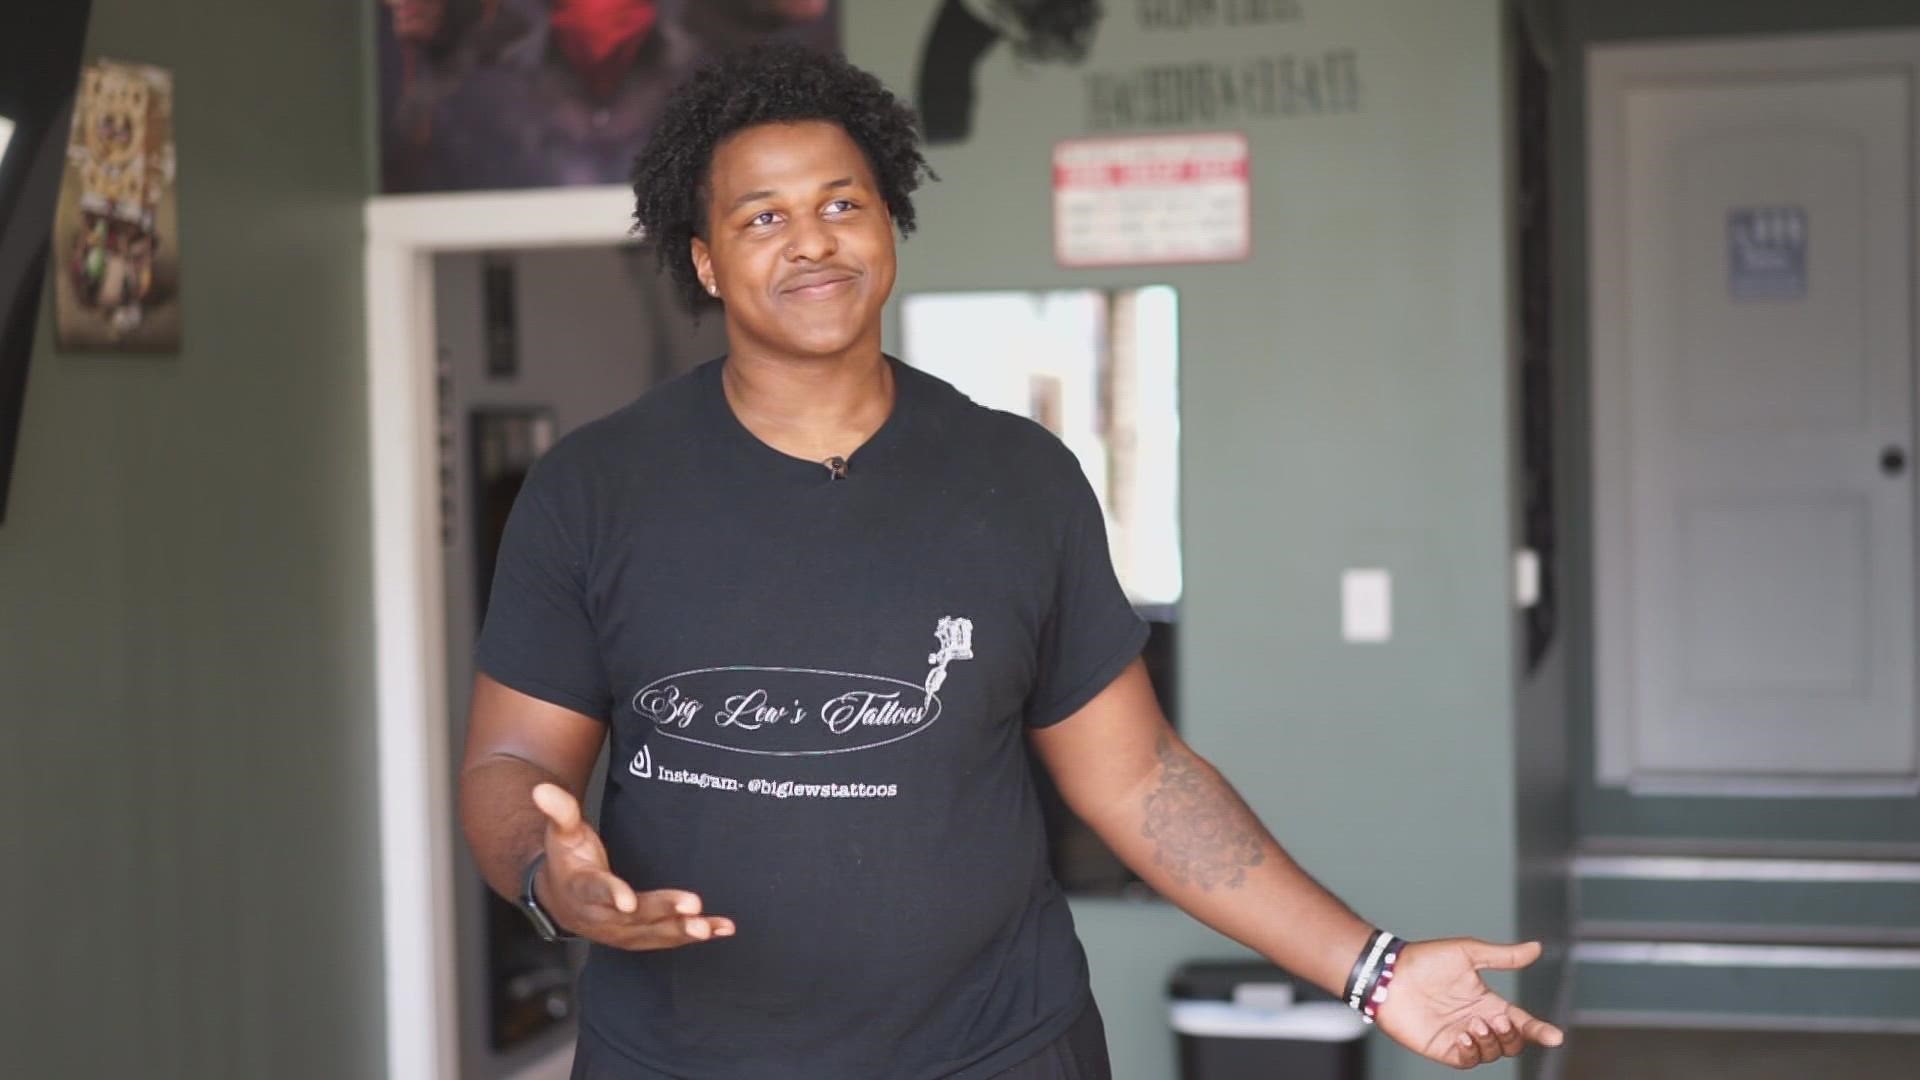 21-year-old Indianapolis tattoo shop owner aims to inspire